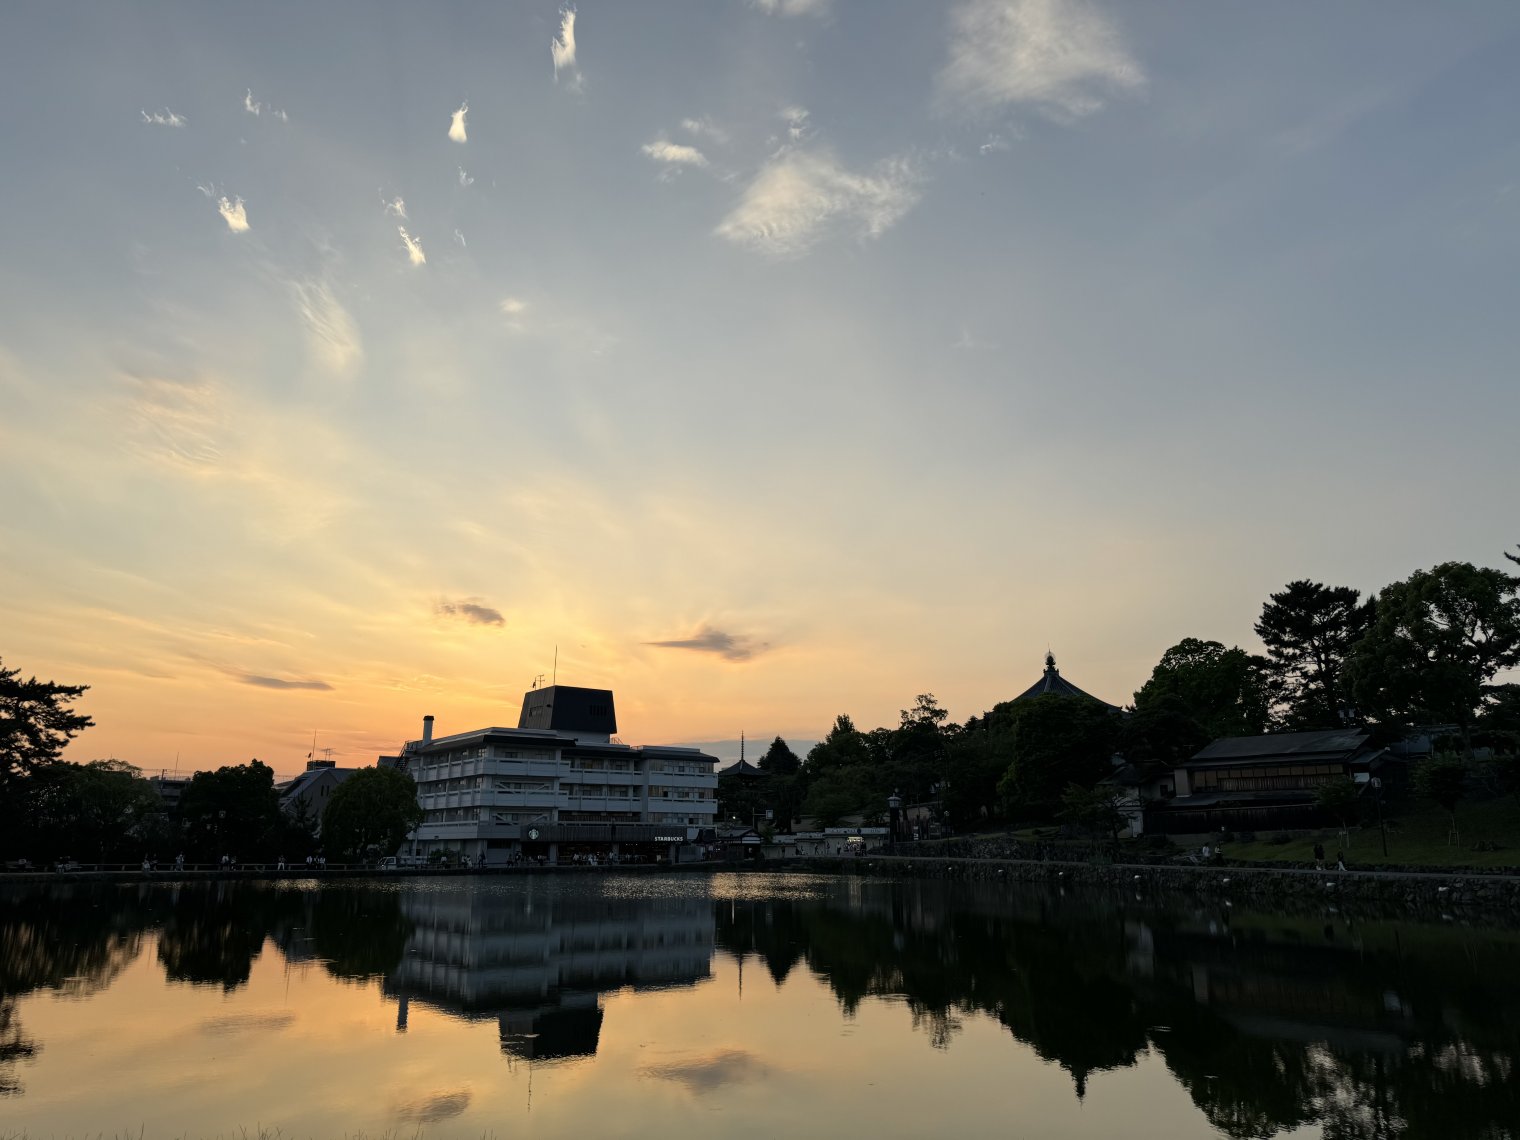 Reflection of a sunset and buildings in the distance on a lake in Nara